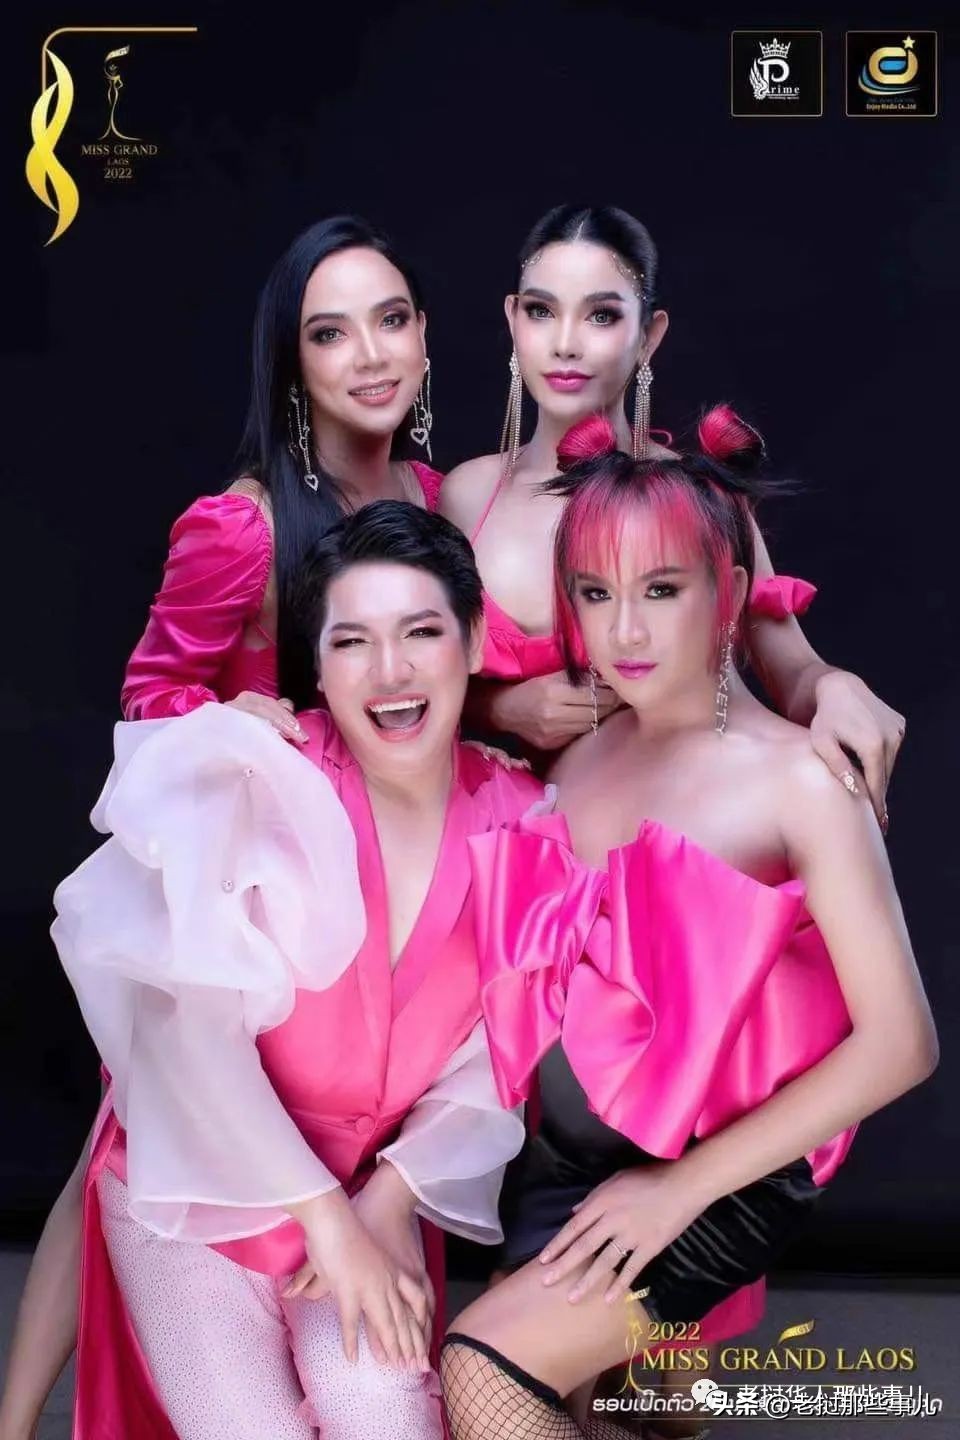 Spicy Blind The Lao Shemale Girl Group Is Out Of The Circle And Its Popularity Is Higher Than